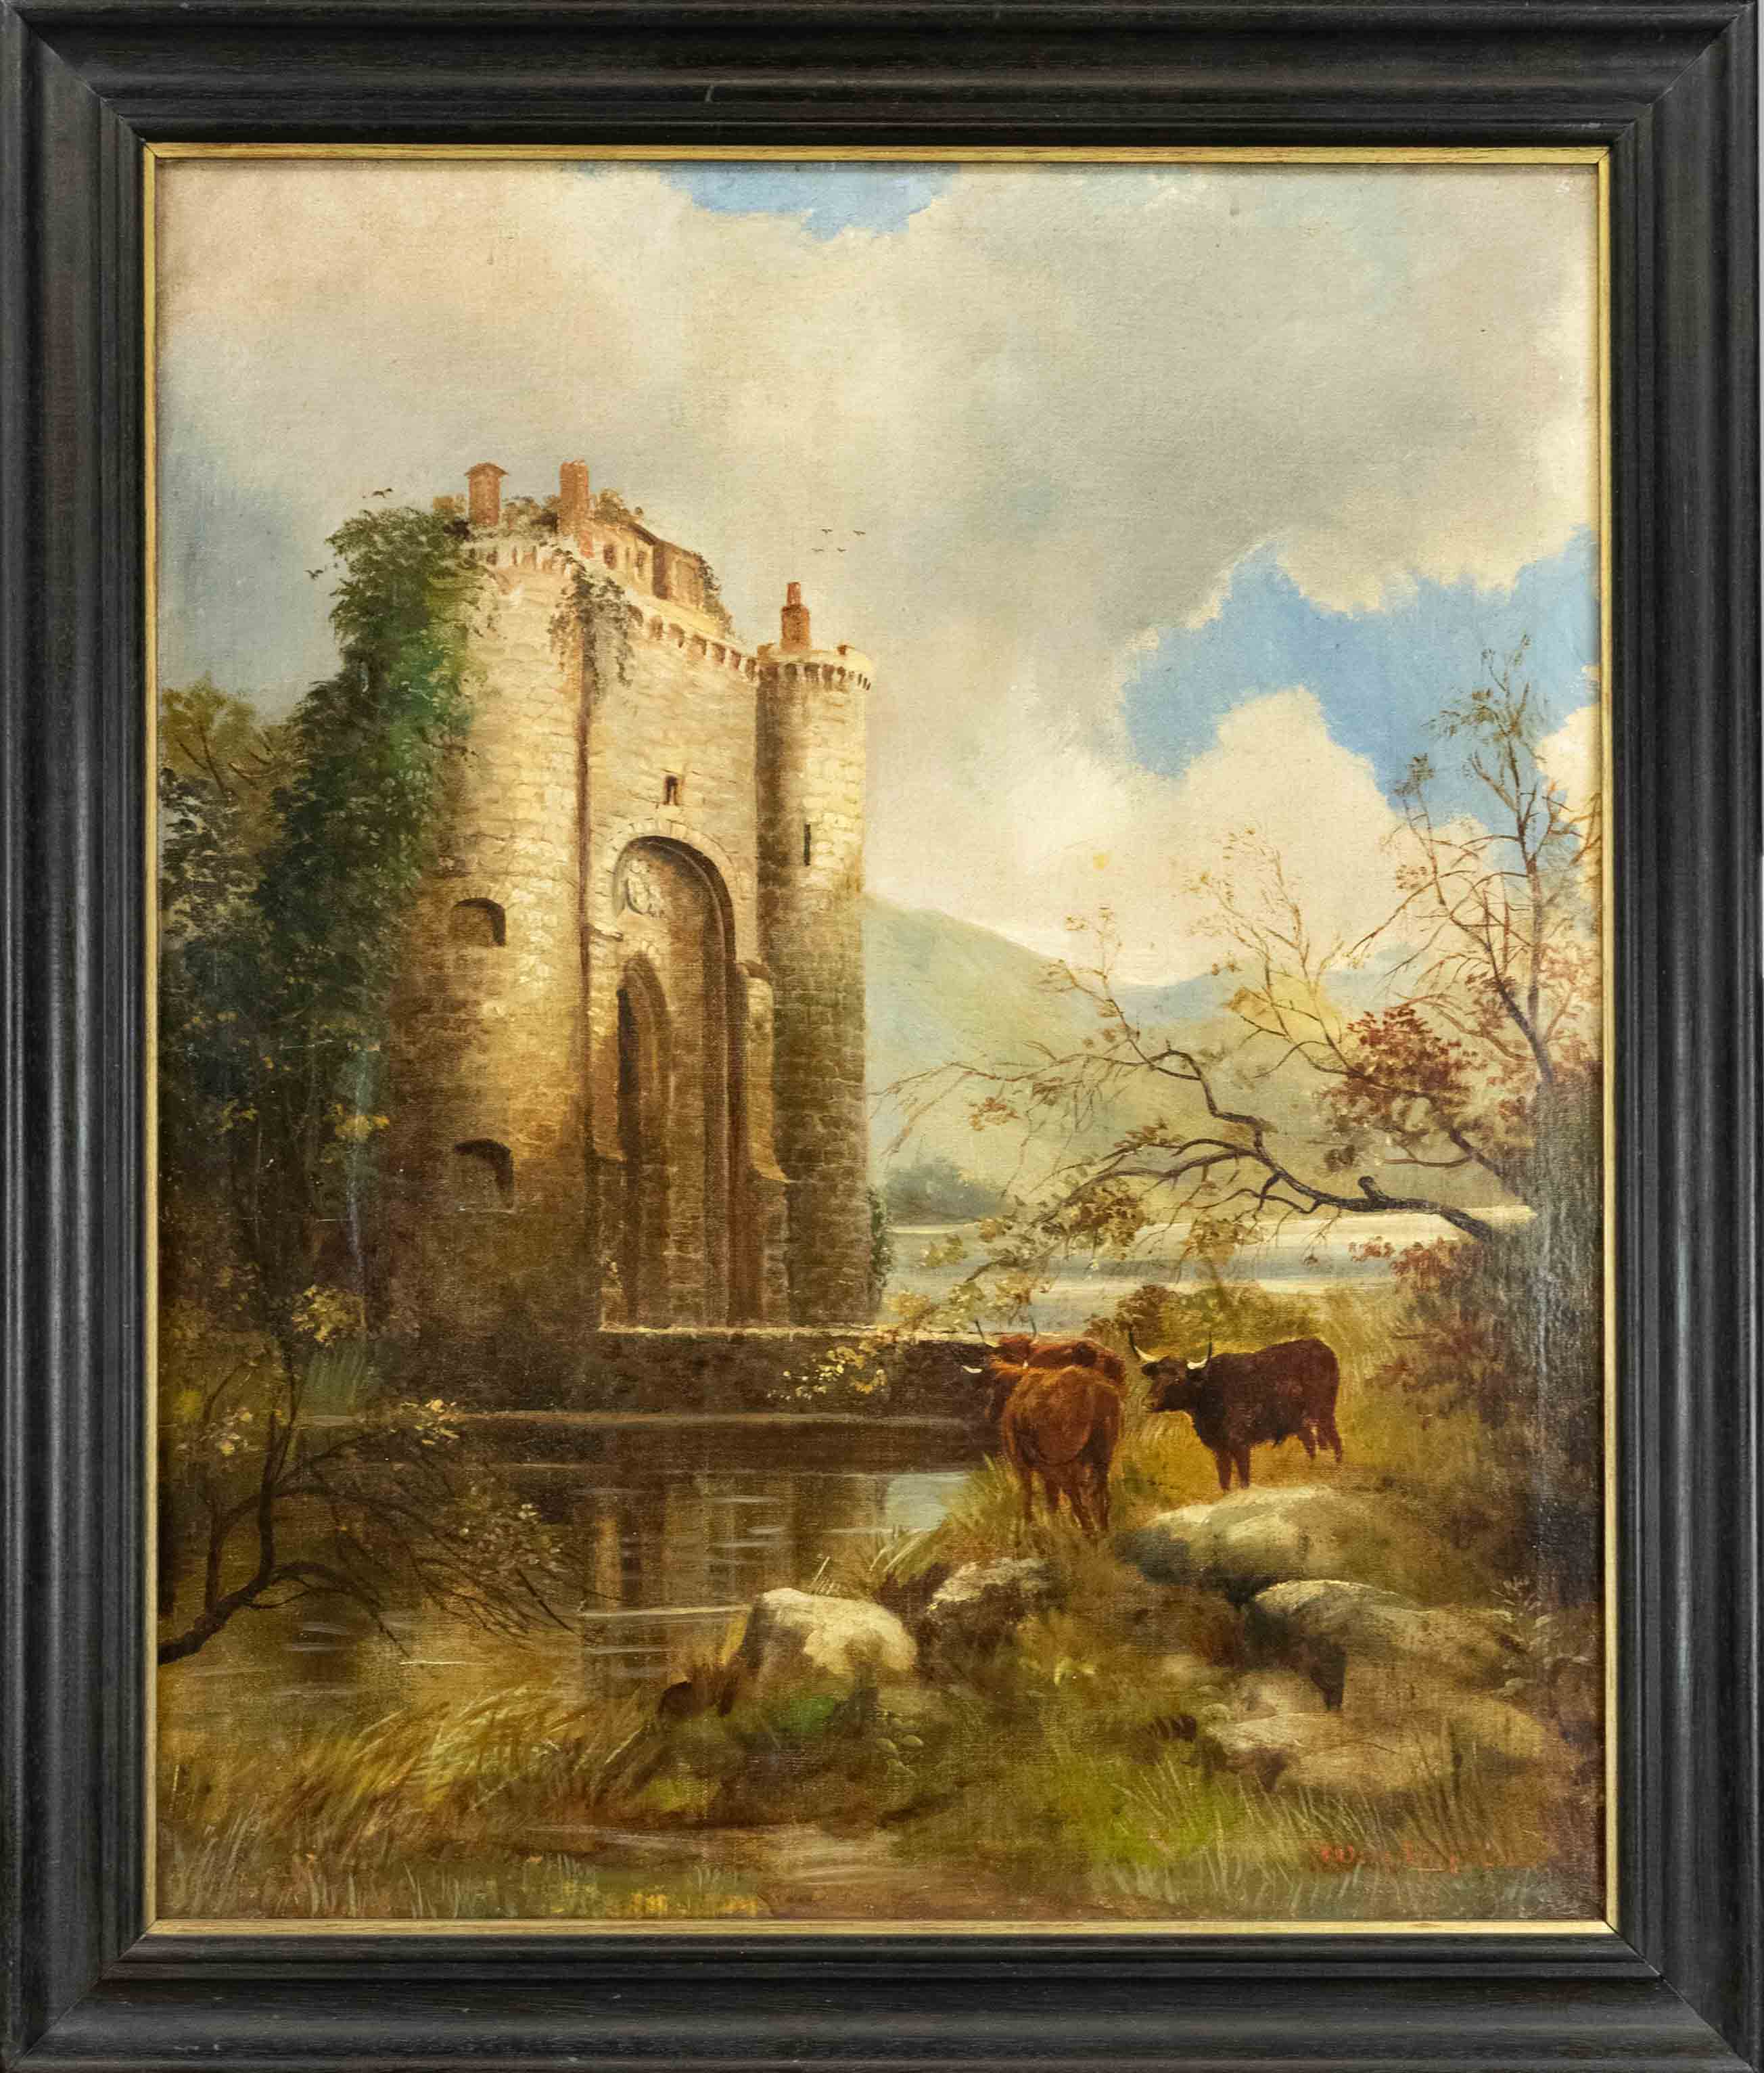 W.H. Hill, English painter c. 1900, Landscape in the Highlands with Ruin of a Castle Gate and